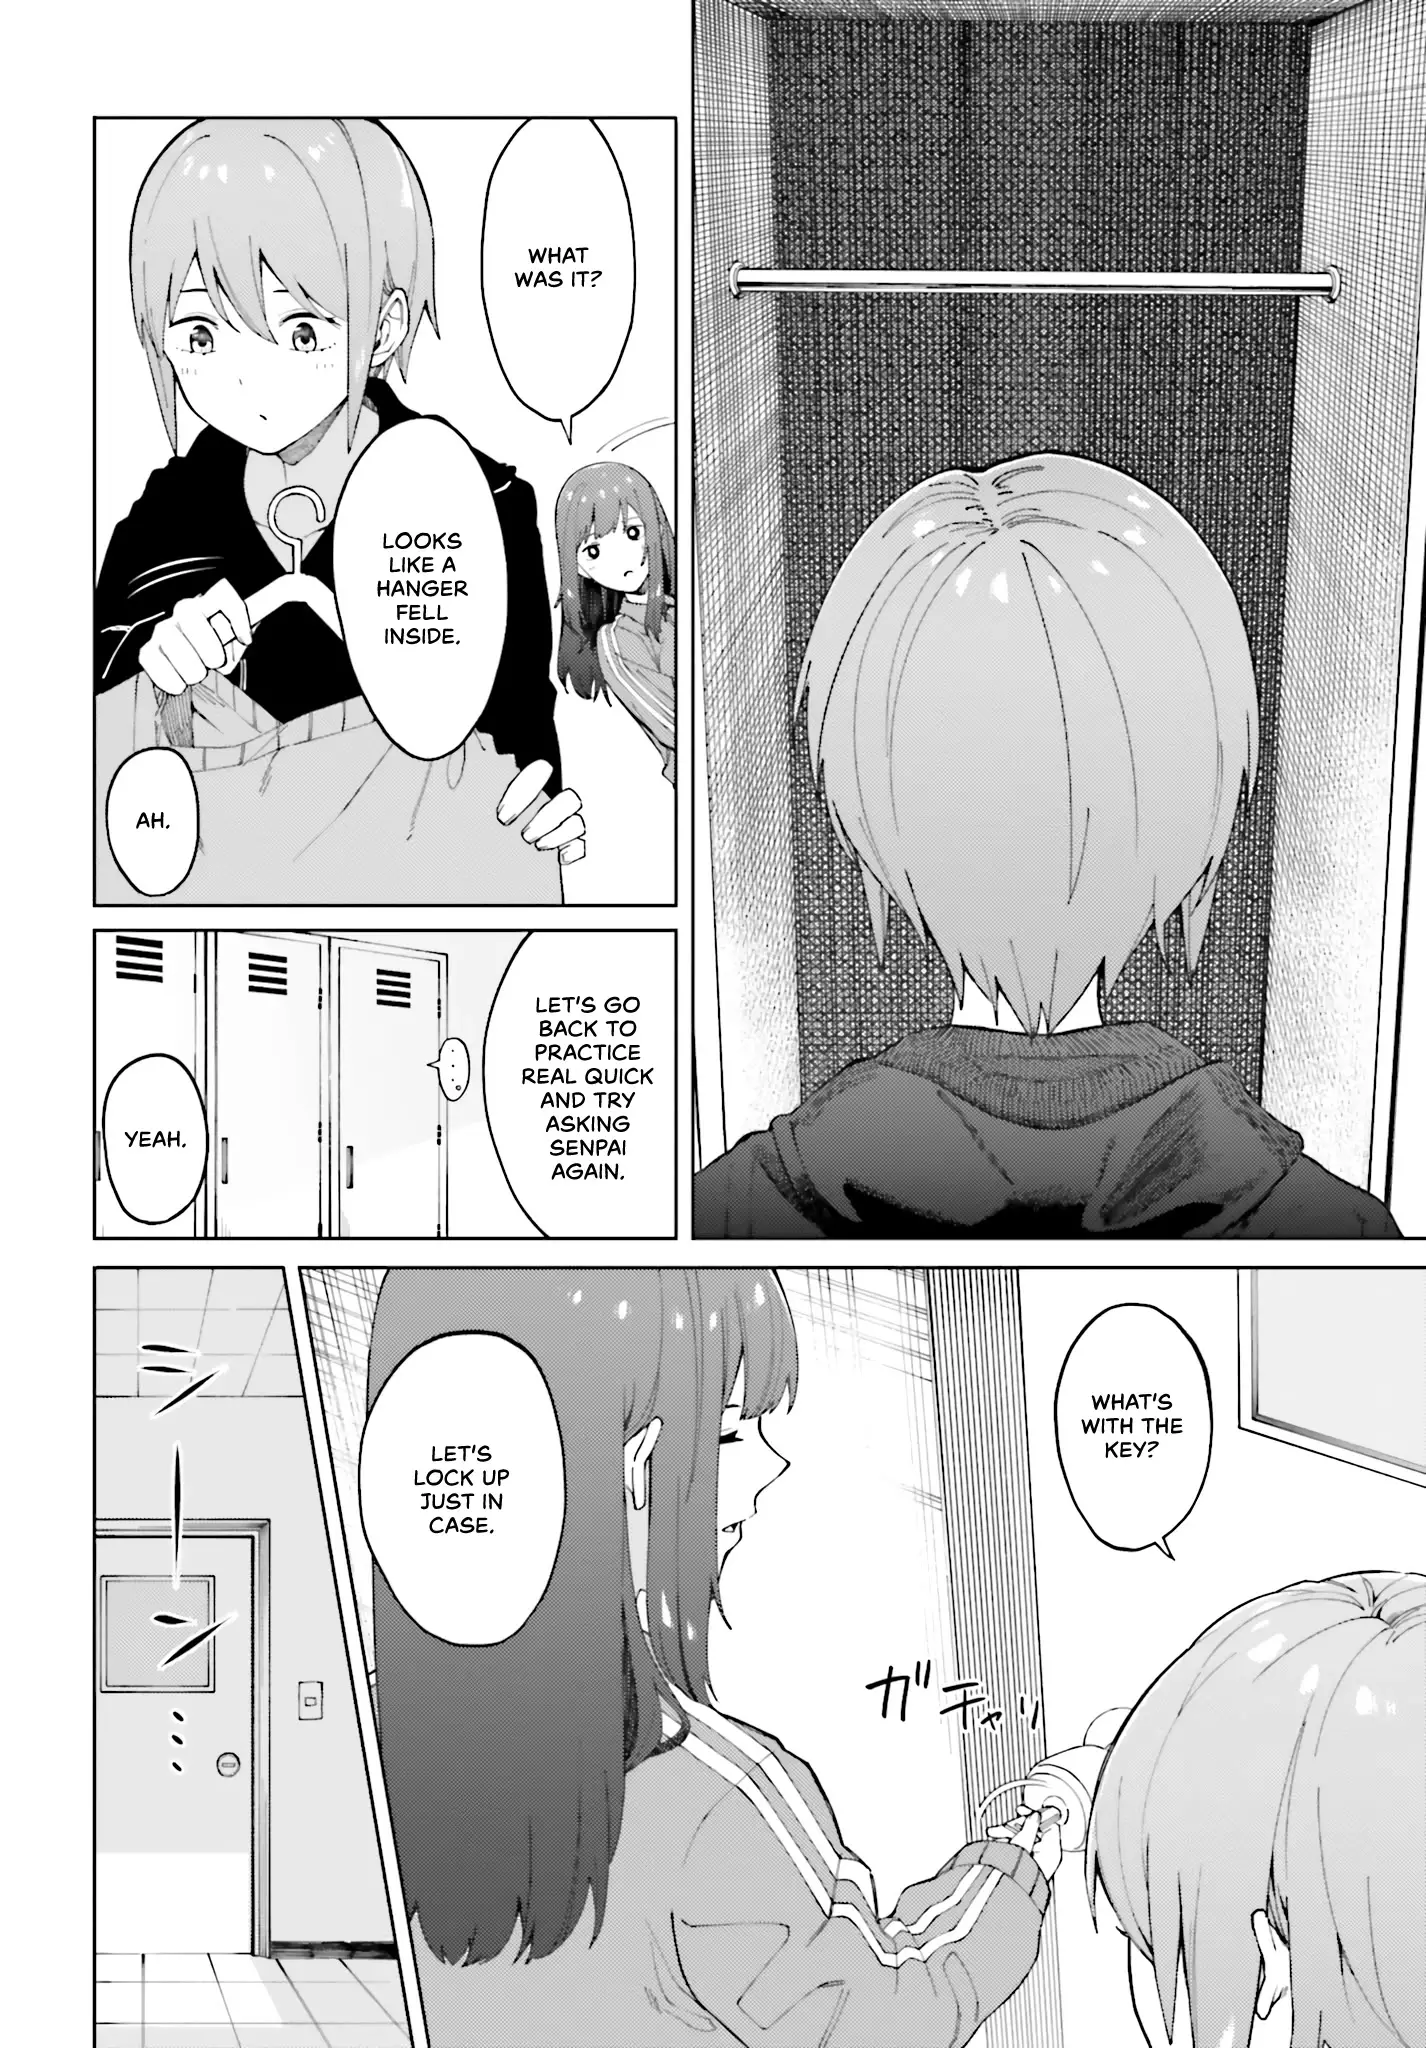 I Don't Understand Shirogane-San's Facial Expression At All - 1 page 27